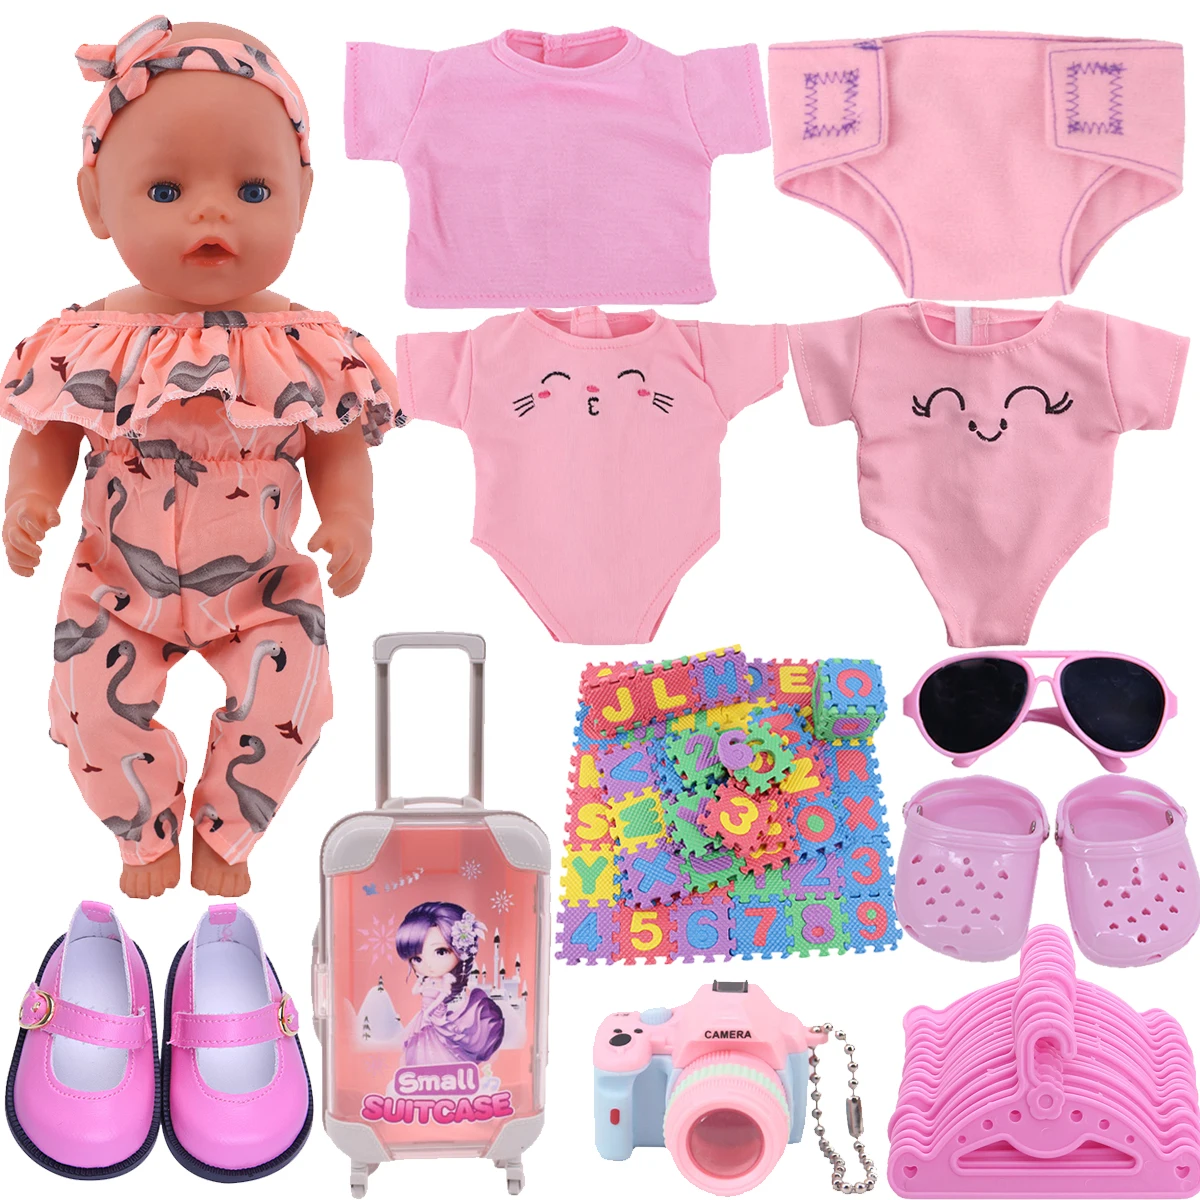 Clothes For Doll Baby Pink Series Swimsuit Fit 18 Inch American And 43 Cm Reborn Doll Accessories, Russian OG Girl Doll DIY Toys